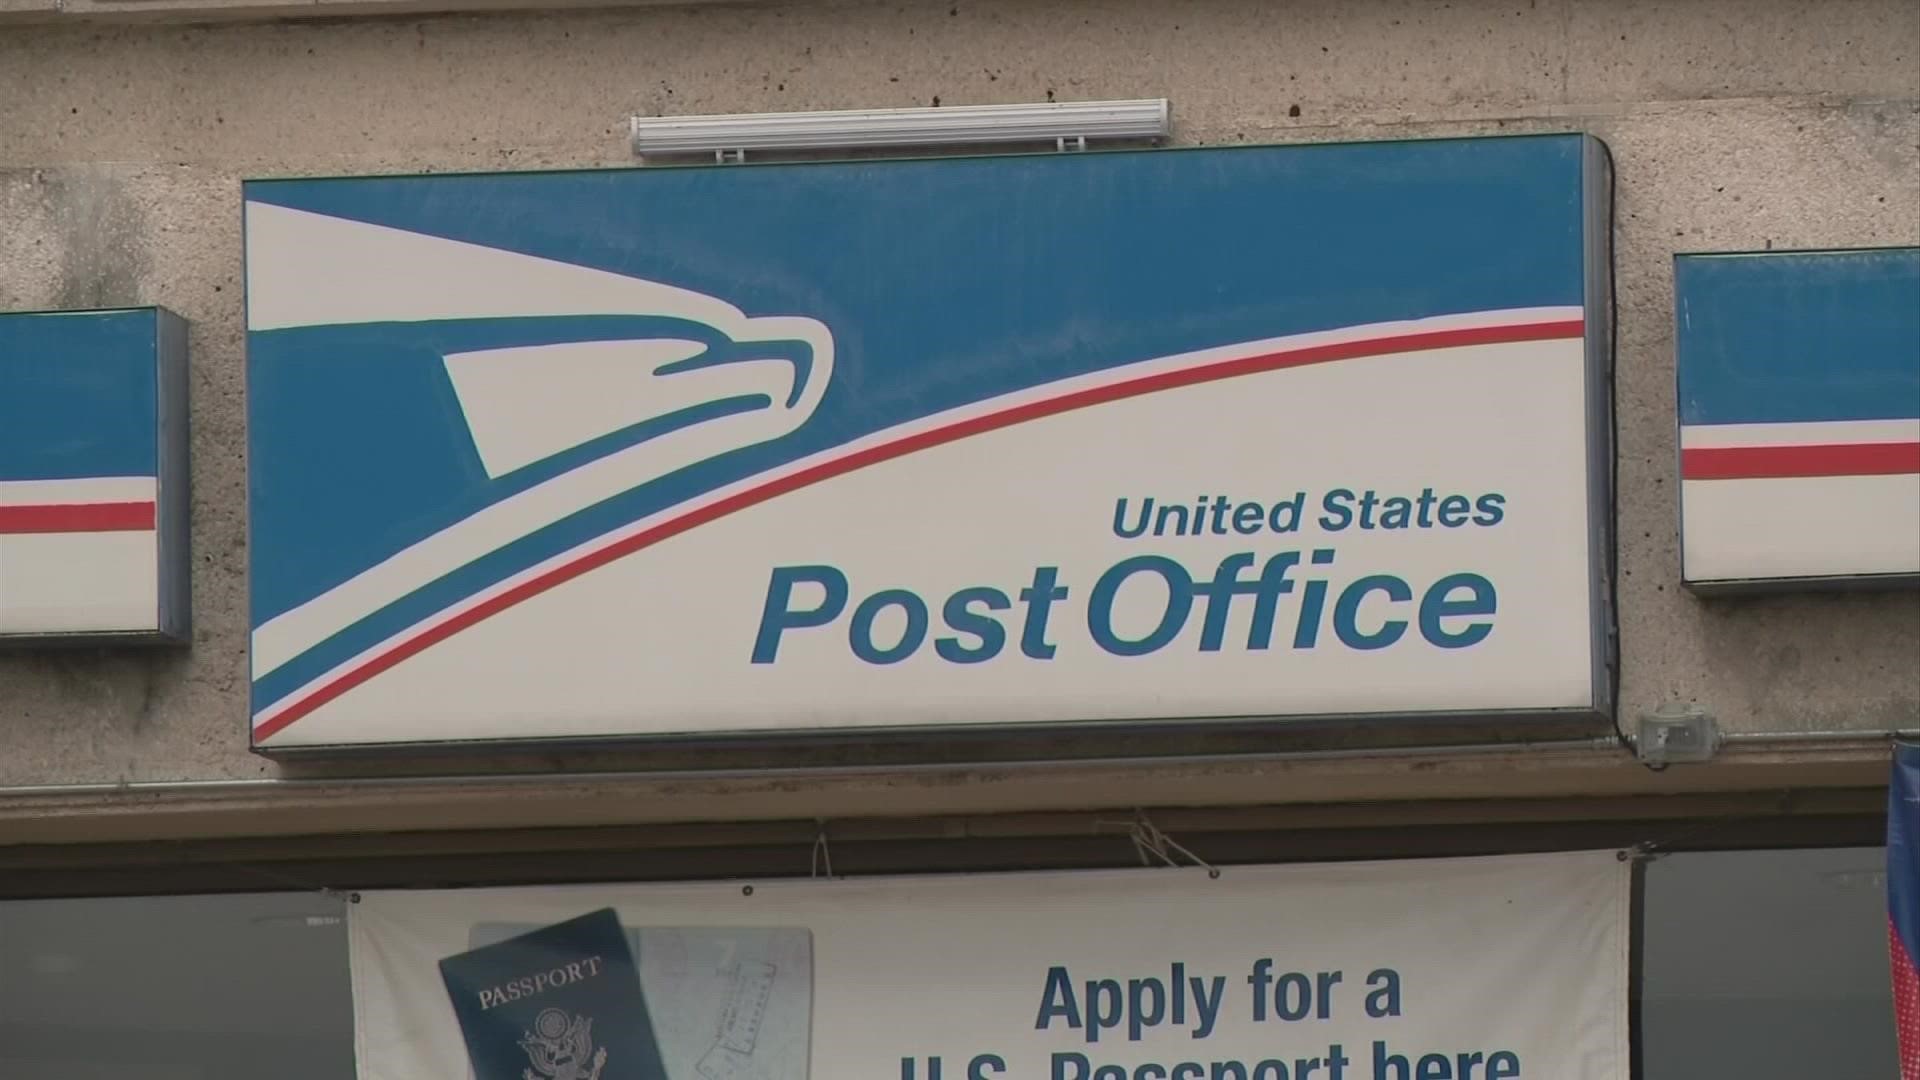 In a statement, USPS says “Our workforce, like others, is not immune to the human impacts of the ongoing coronavirus pandemic.”